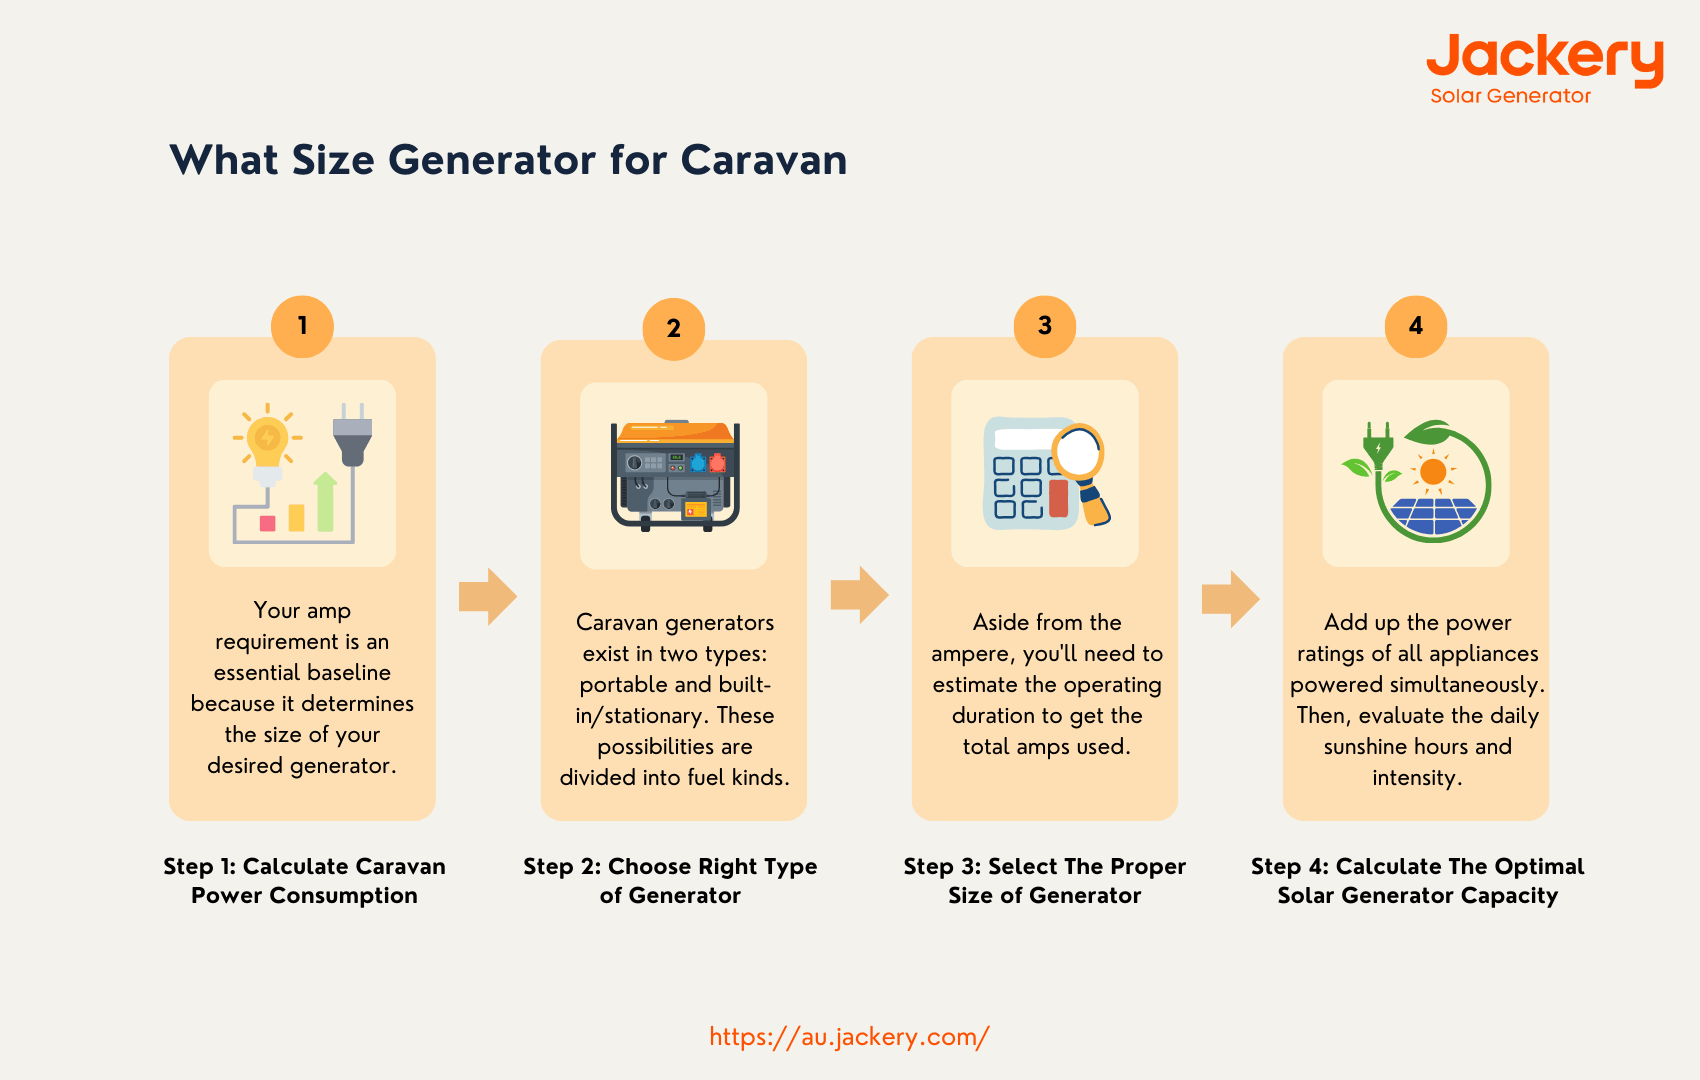 how to determine what size generator for caravan